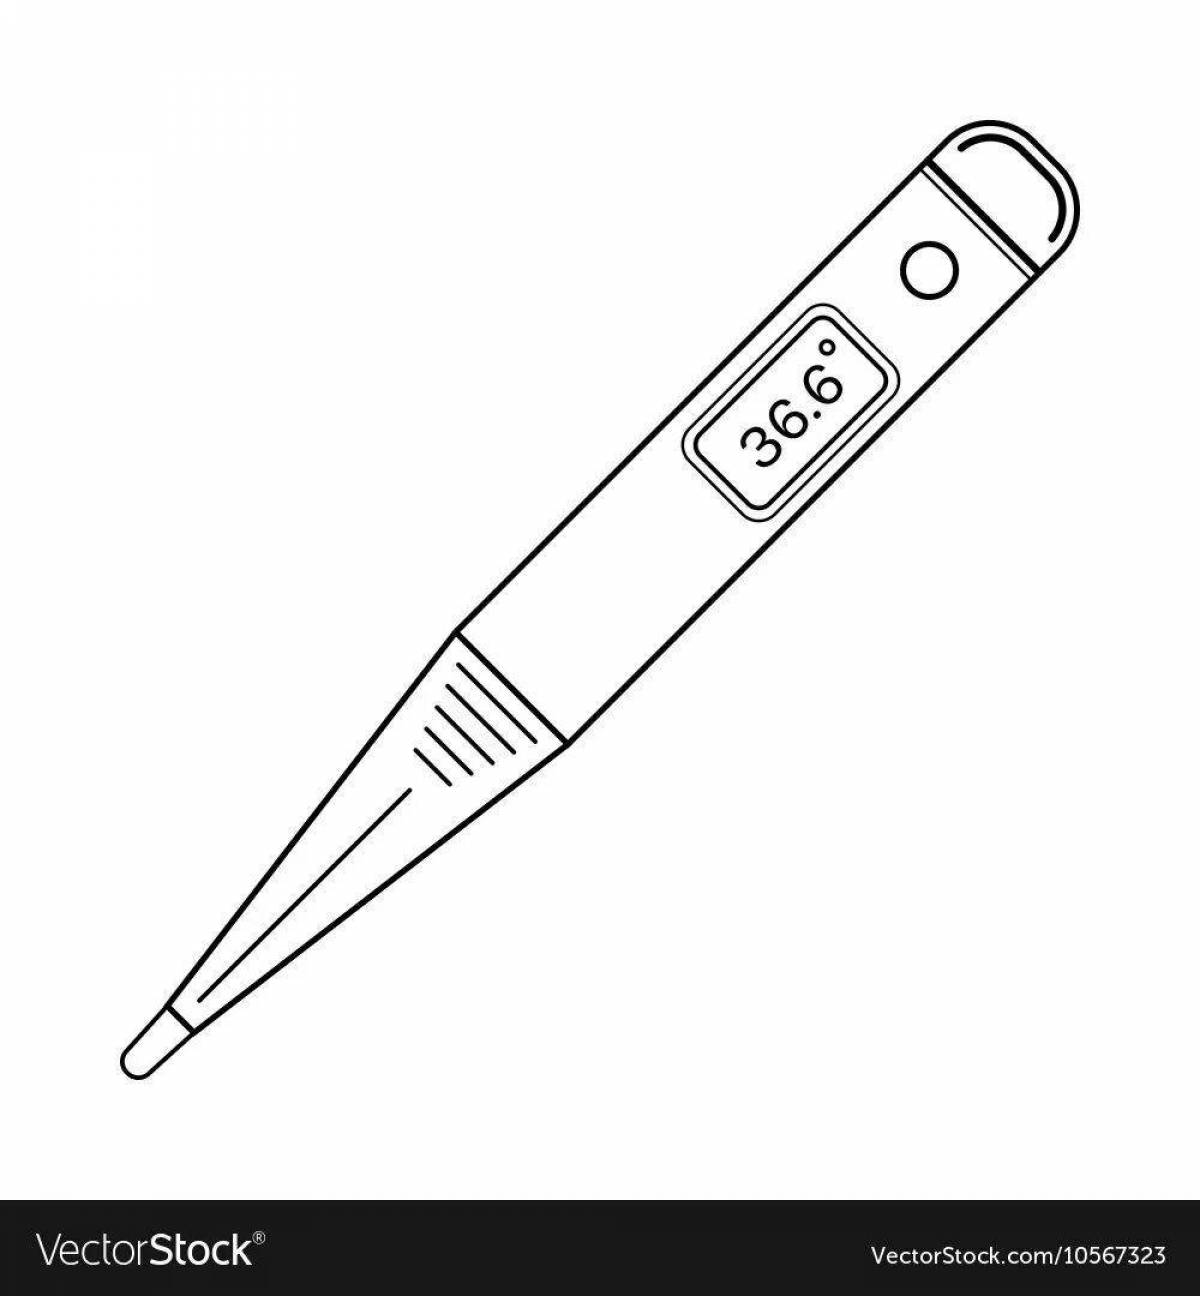 Colourful thermometer coloring page for juniors